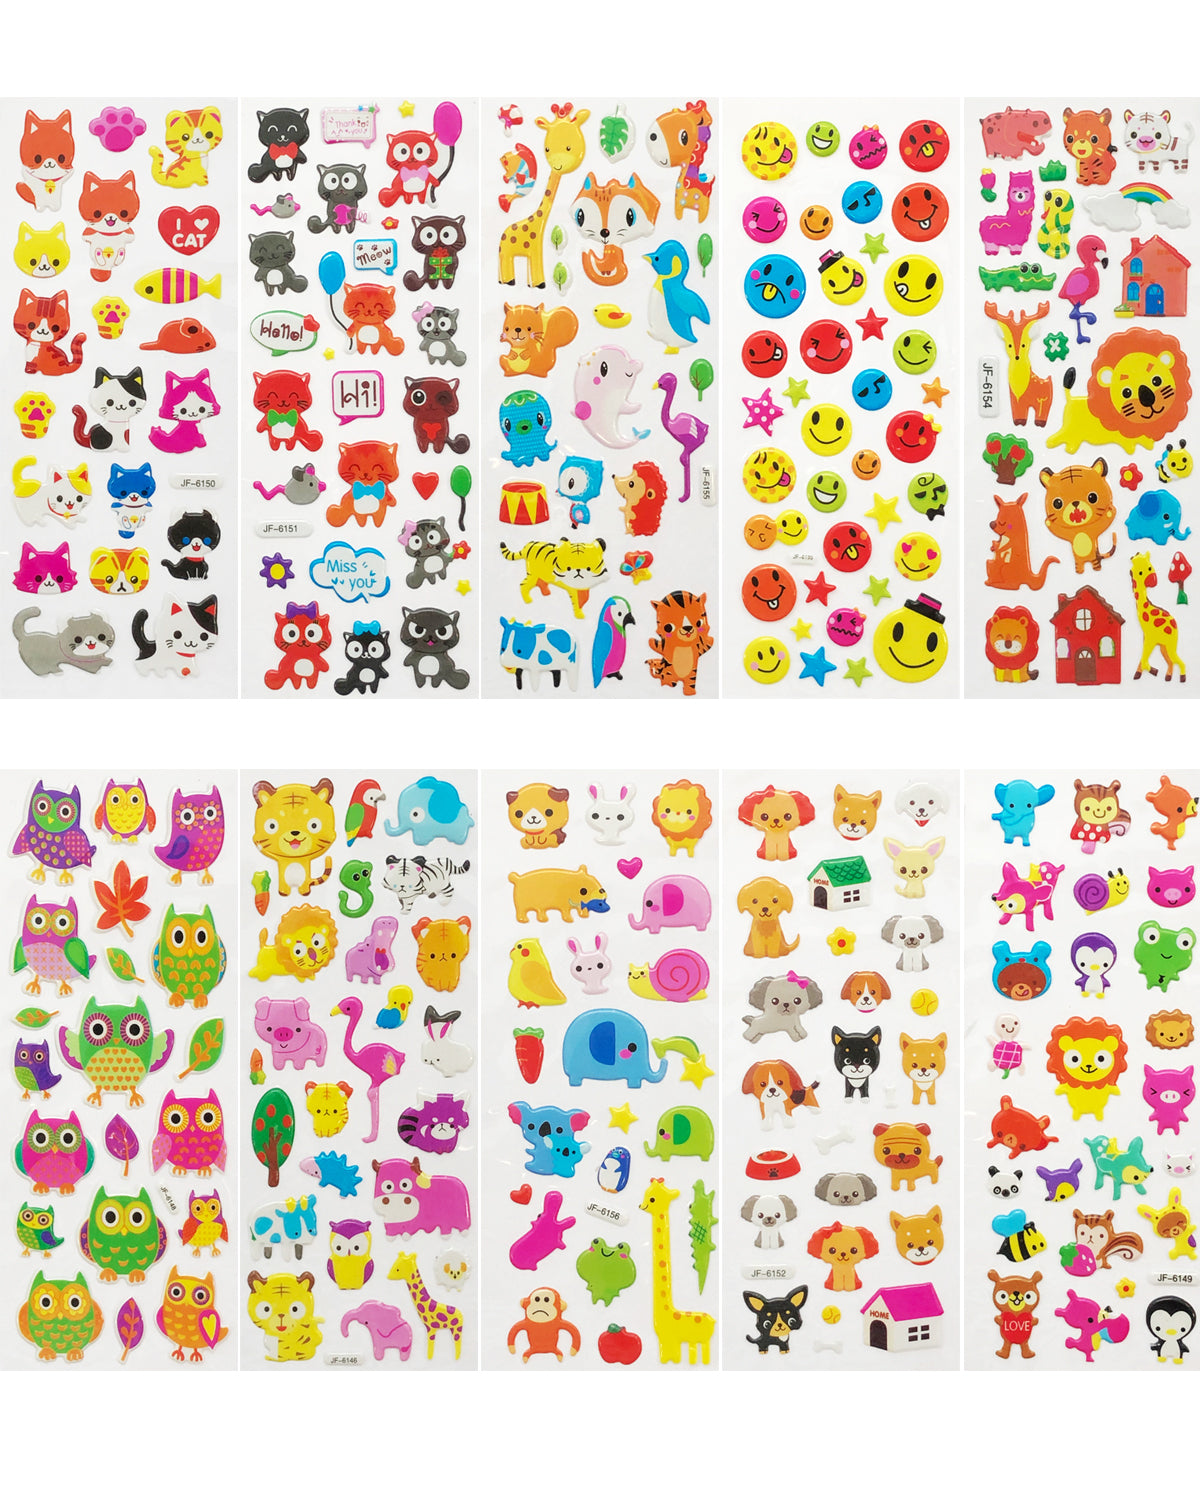 4 Sheets Scrapbooking Stickers Colorful Bubble Pattern Craft